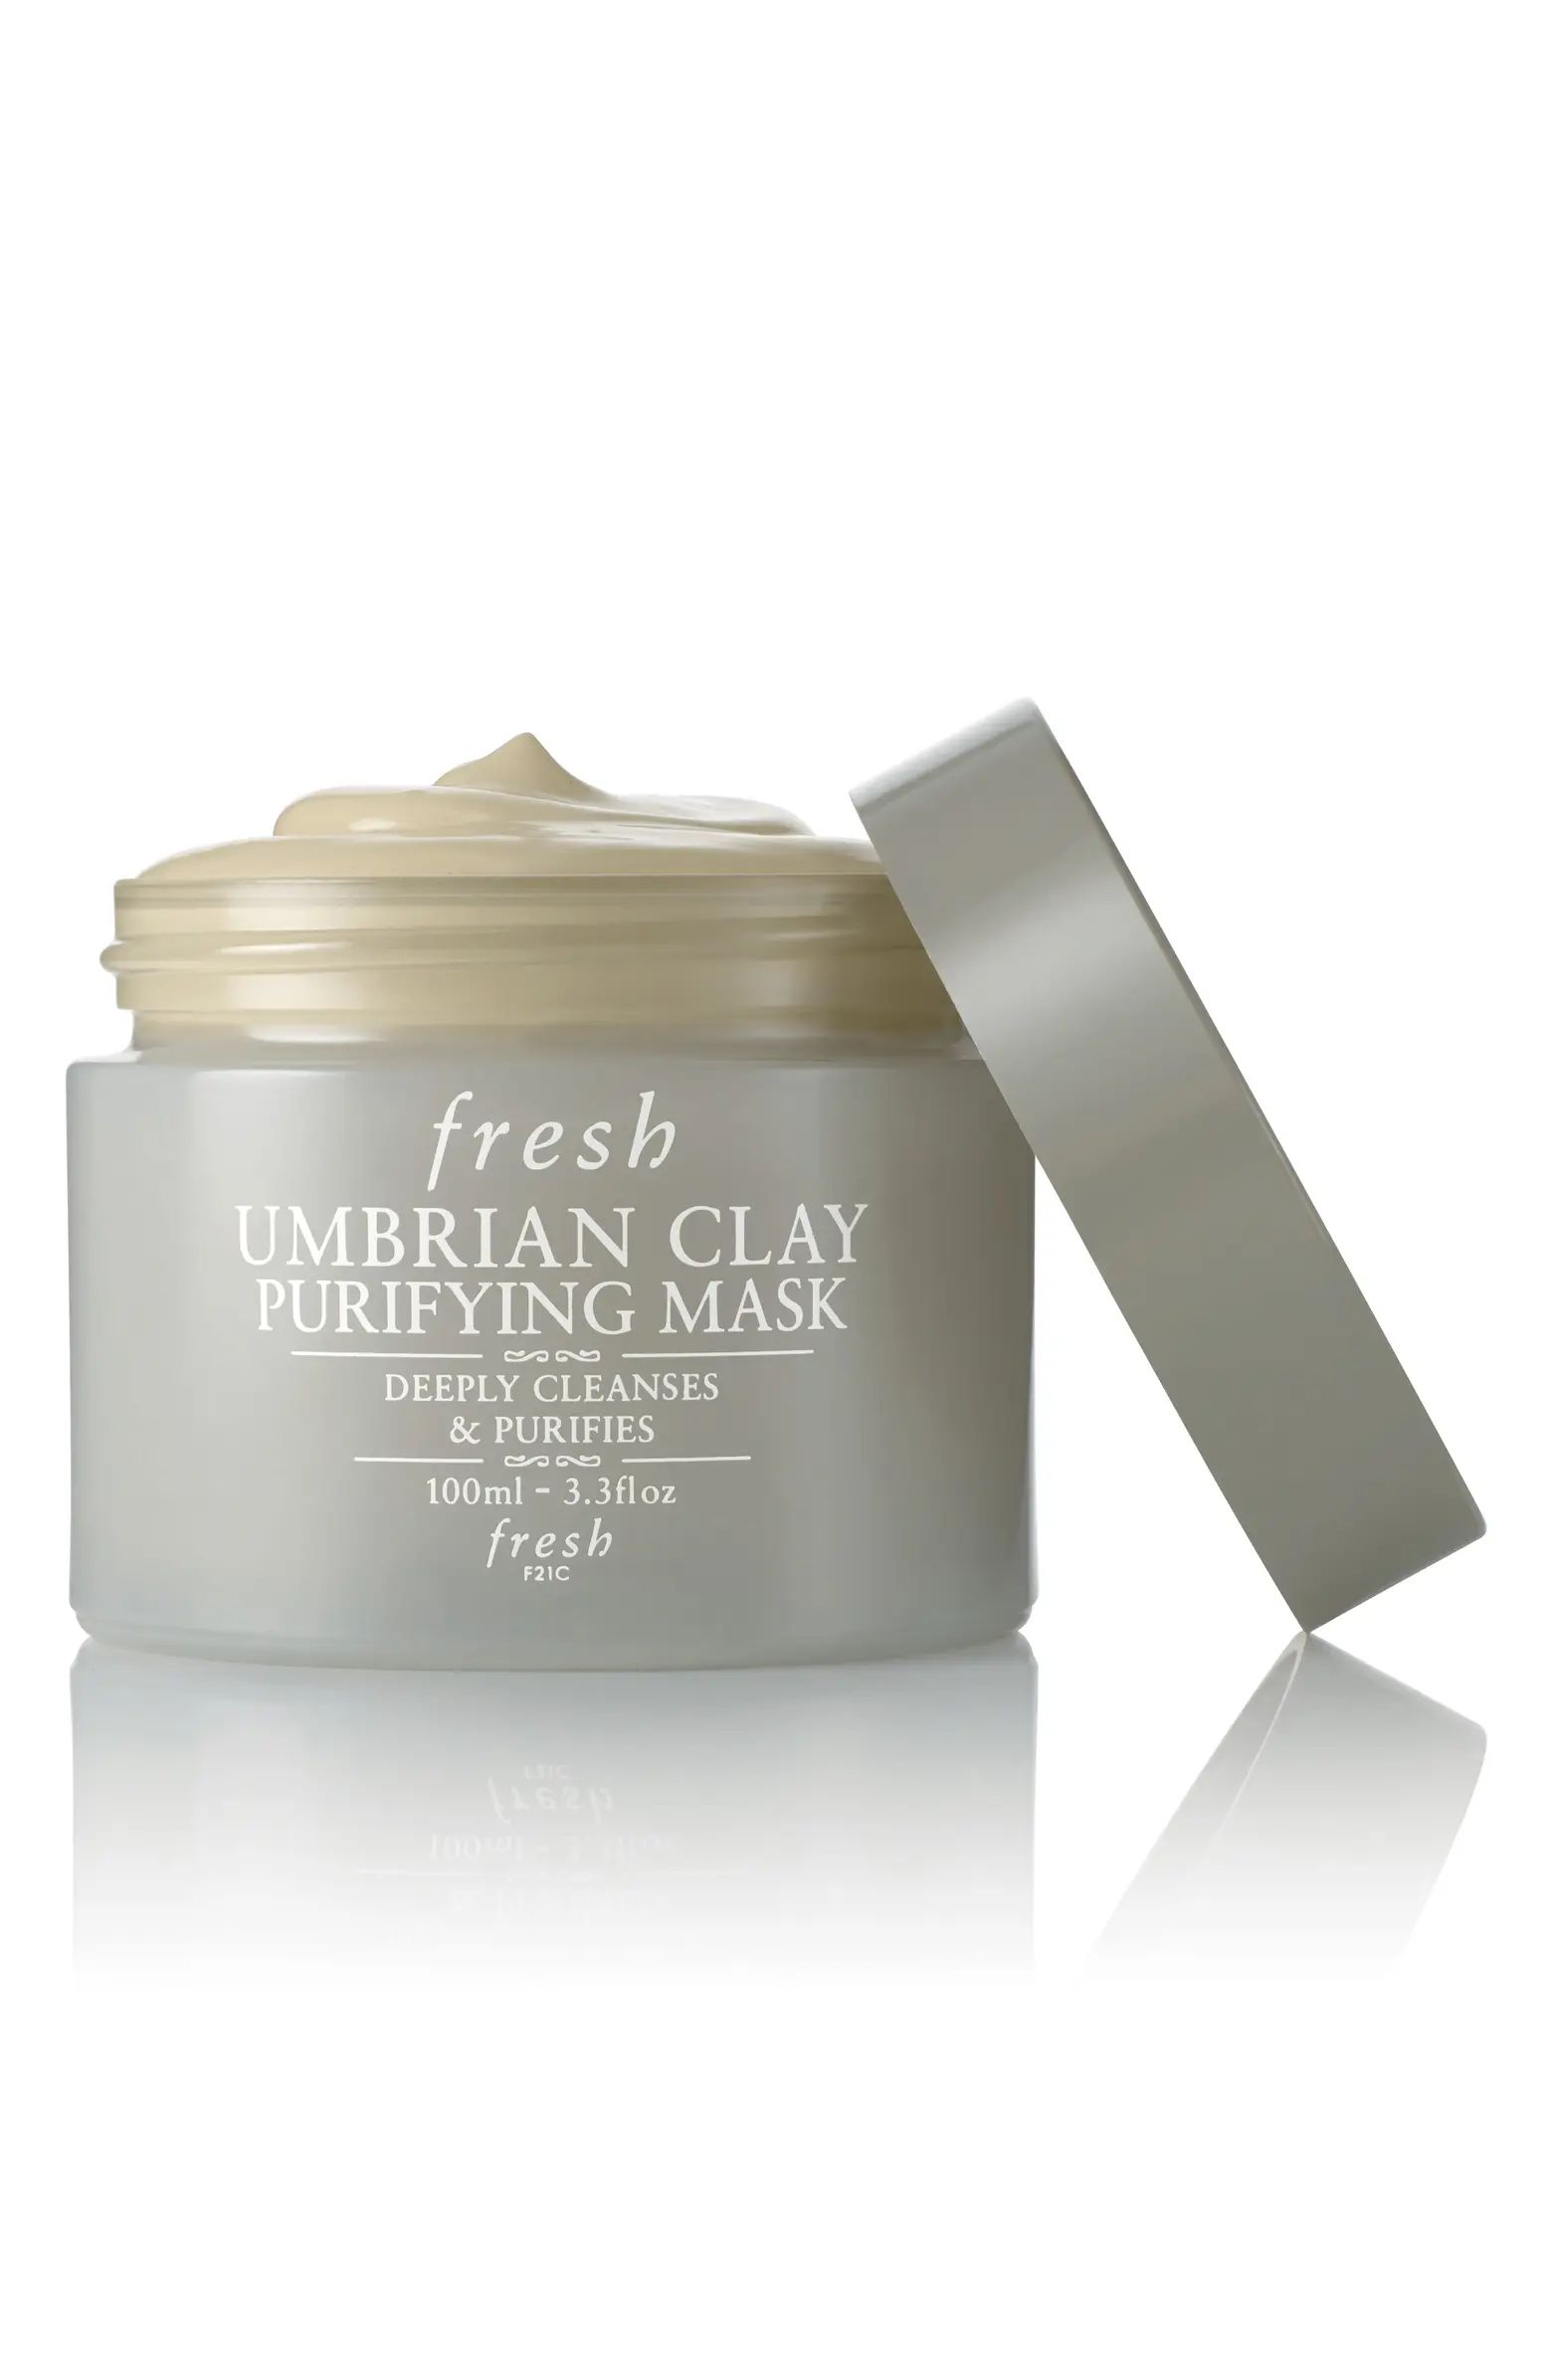 Umbrian Clay Purifying Mask | Nordstrom